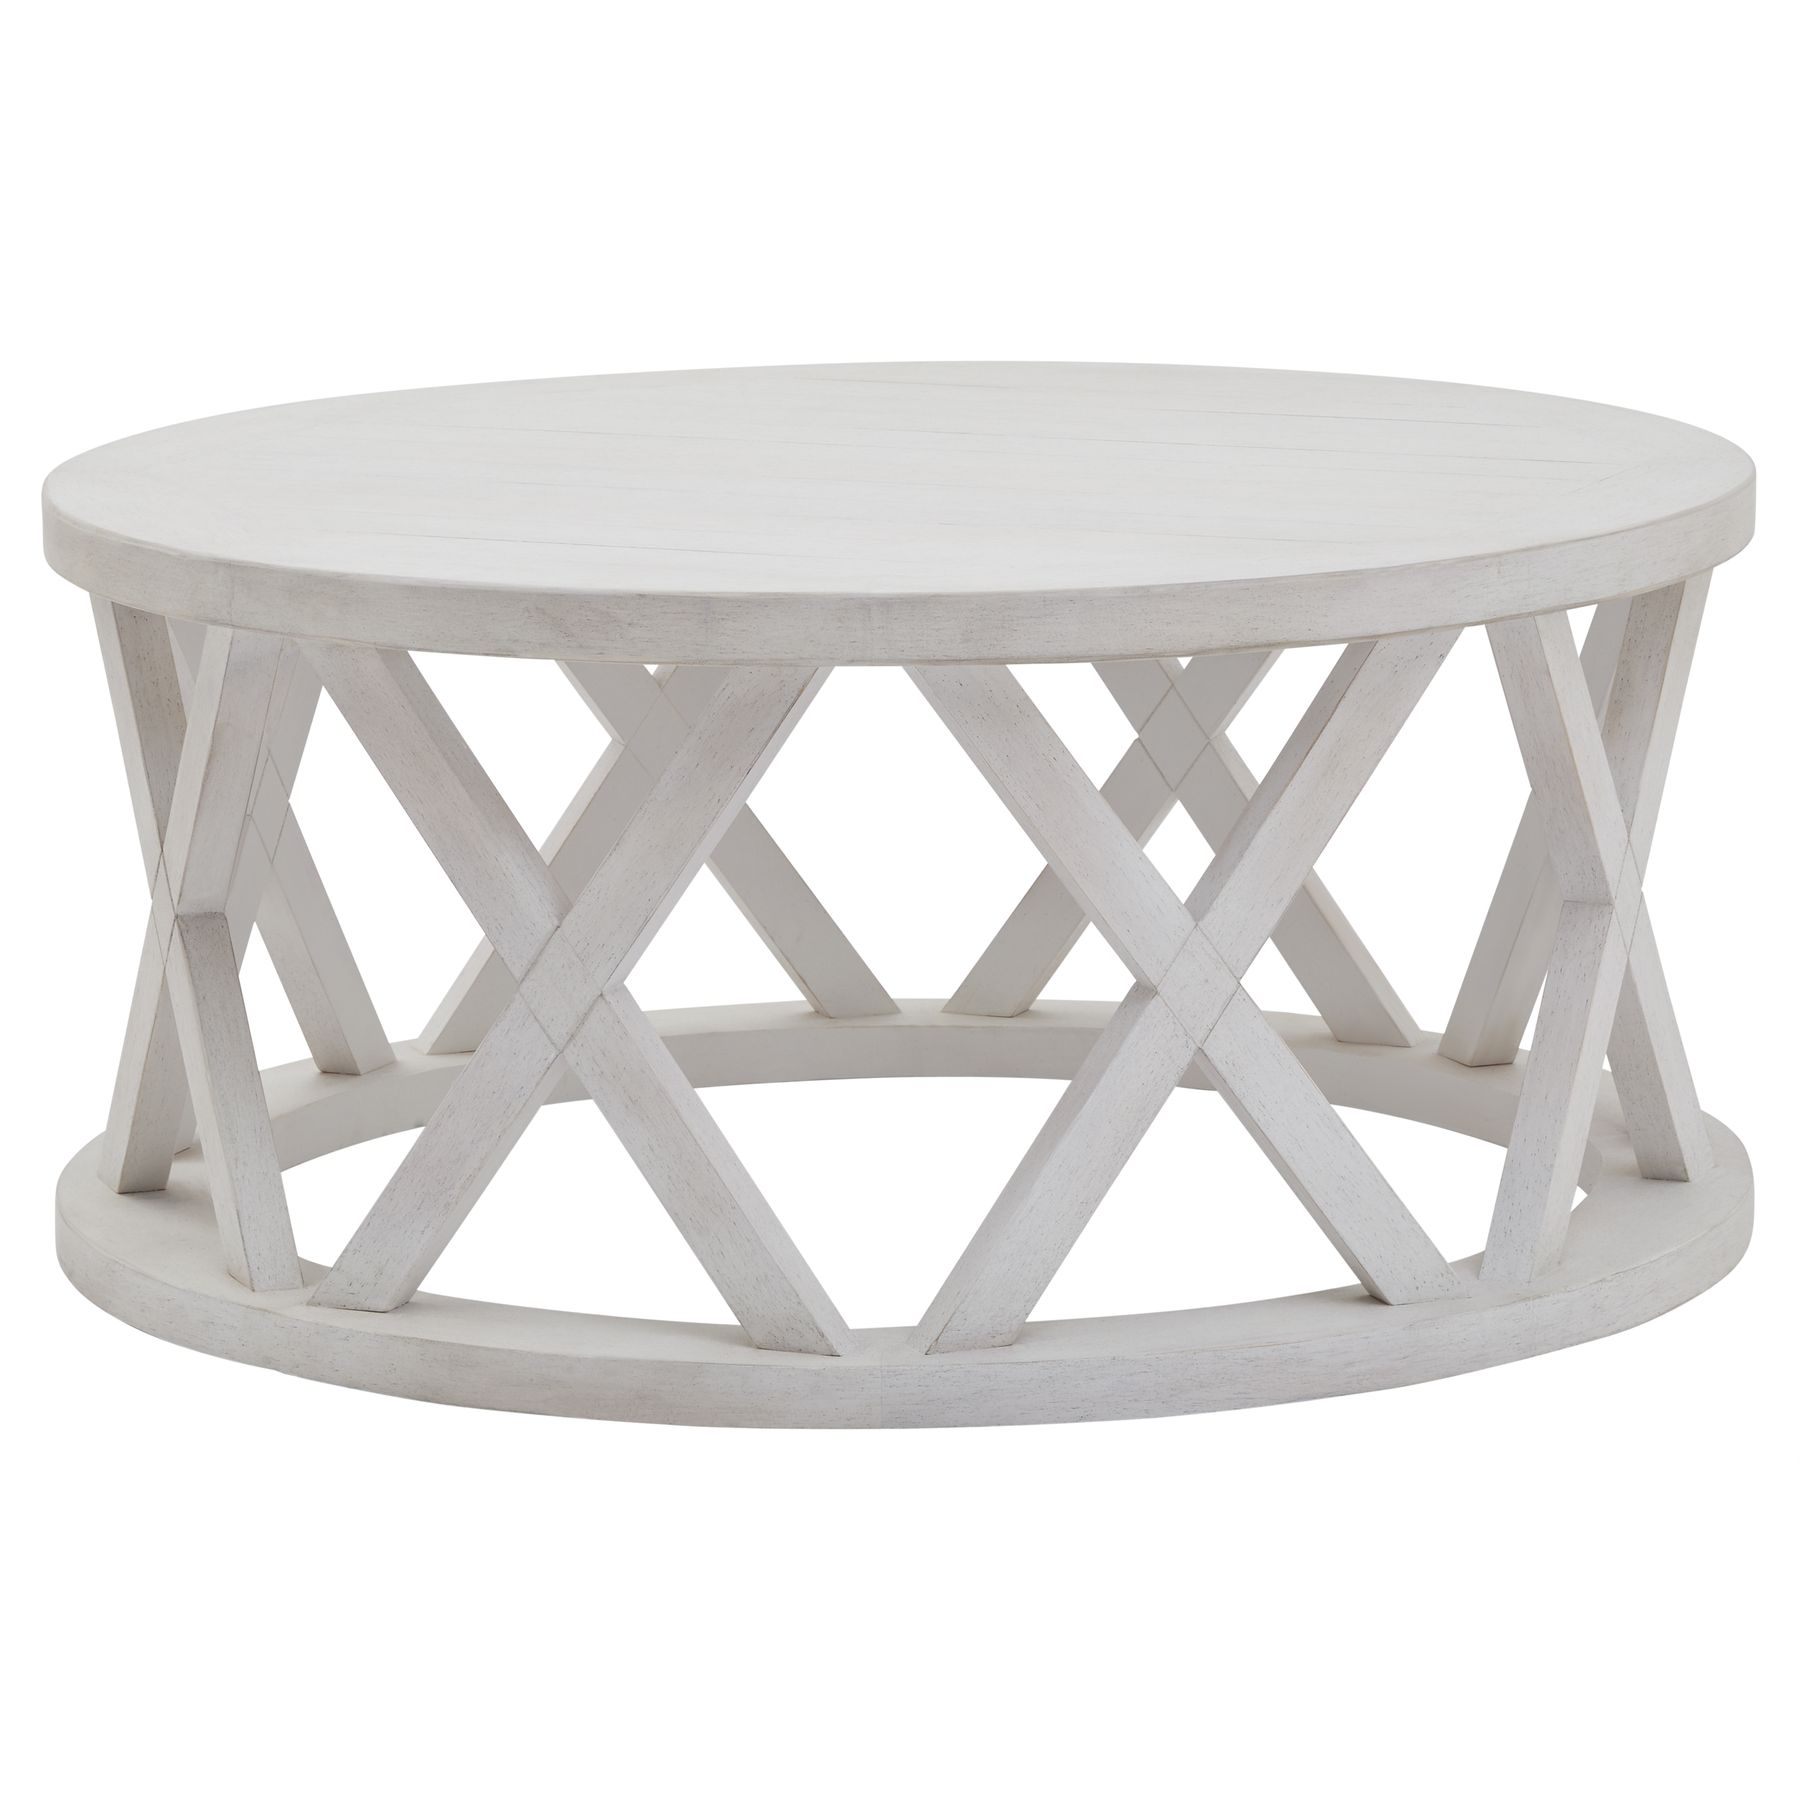 Stamford Plank Collection Round Coffee Table - Image 1